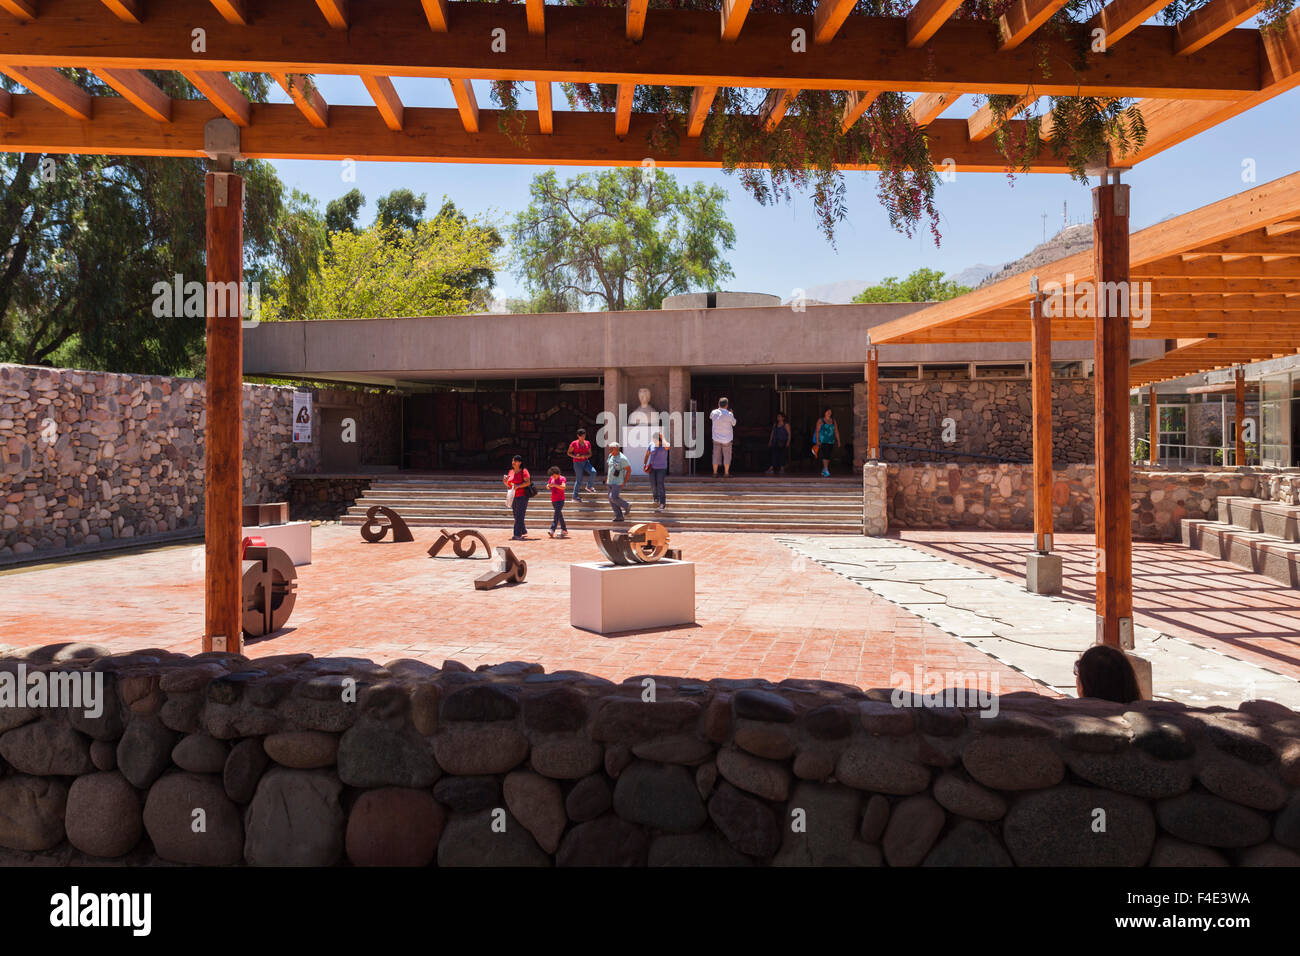 Chile, Elqui Valley, Vicuna, Museo Gabriela Mistral, dedicated to Noble prize winning poet Gabriela Mistral, courtyard. Stock Photo